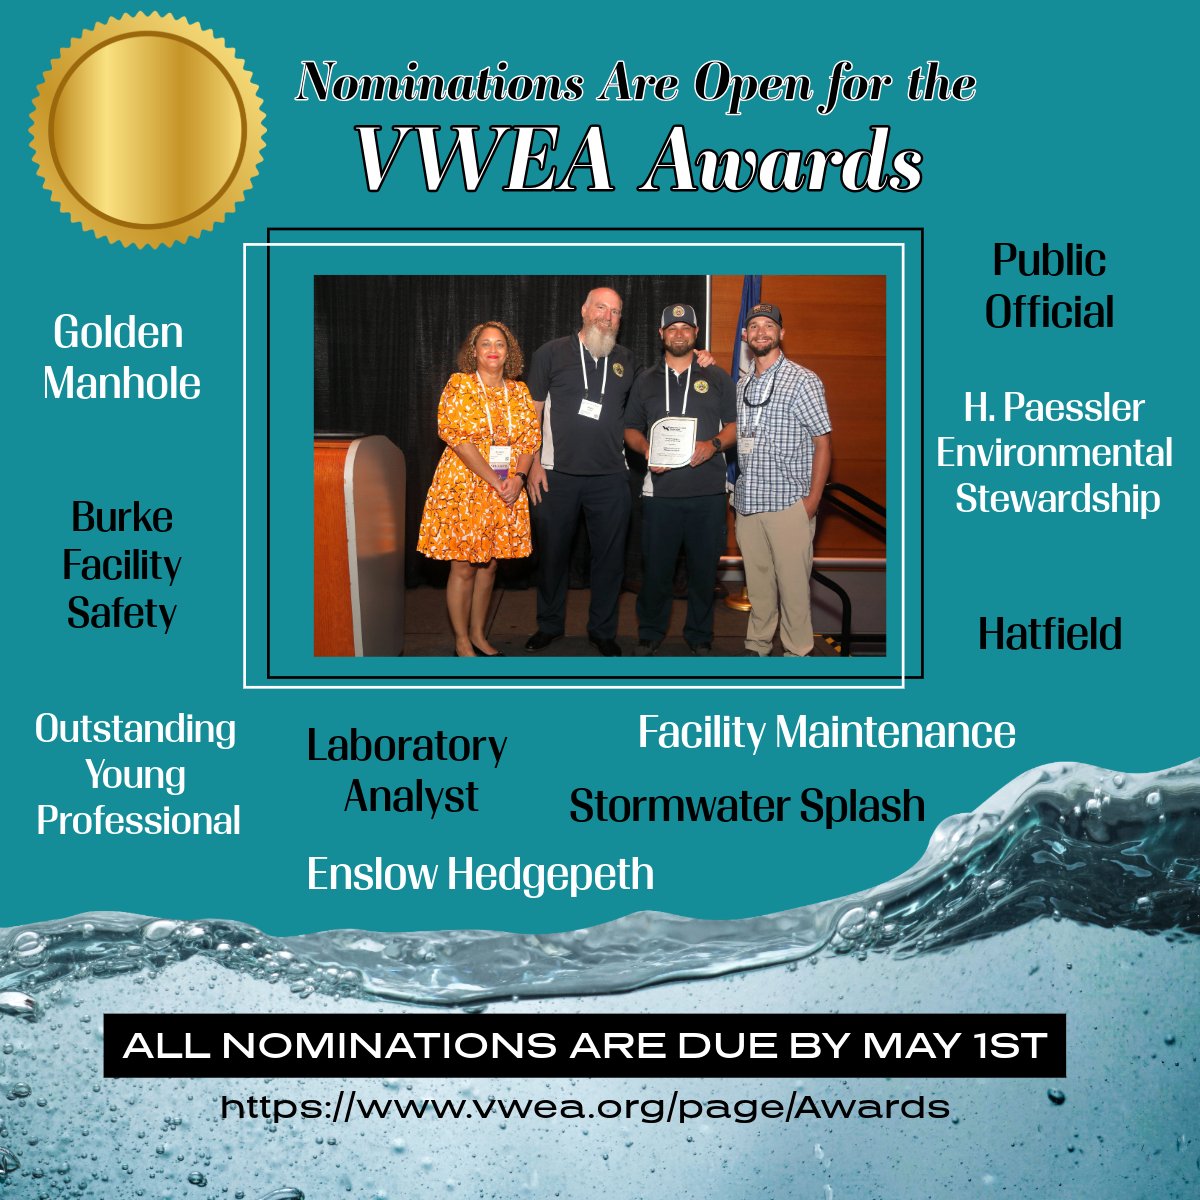 Each year at WaterJAM, VWEA recognizes individuals and organizations who have made outstanding contributions to the water environment profession and/or VWEA. 

Submit your nominations here: vwea.org/page/Awards/

#VirginiaWater #WaterIndustry #WasteWater #Stormwater #Utilities